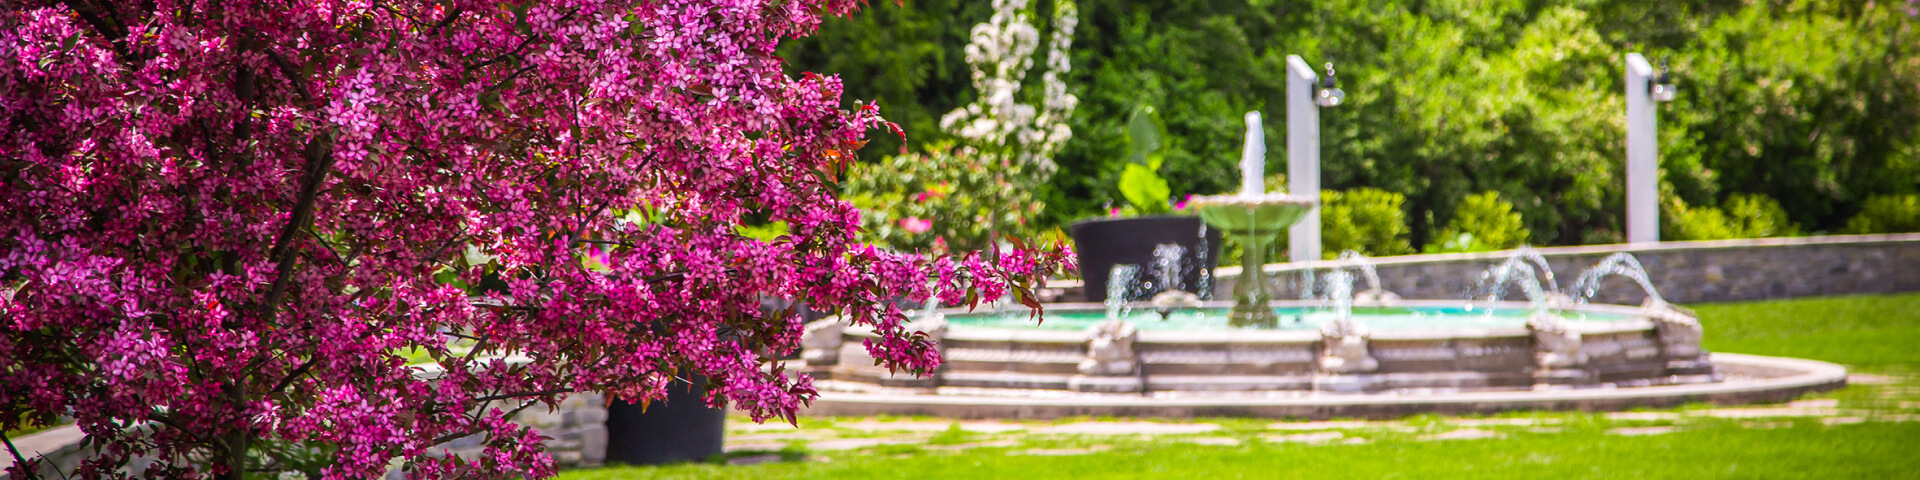 Fountain and purple flowered tree